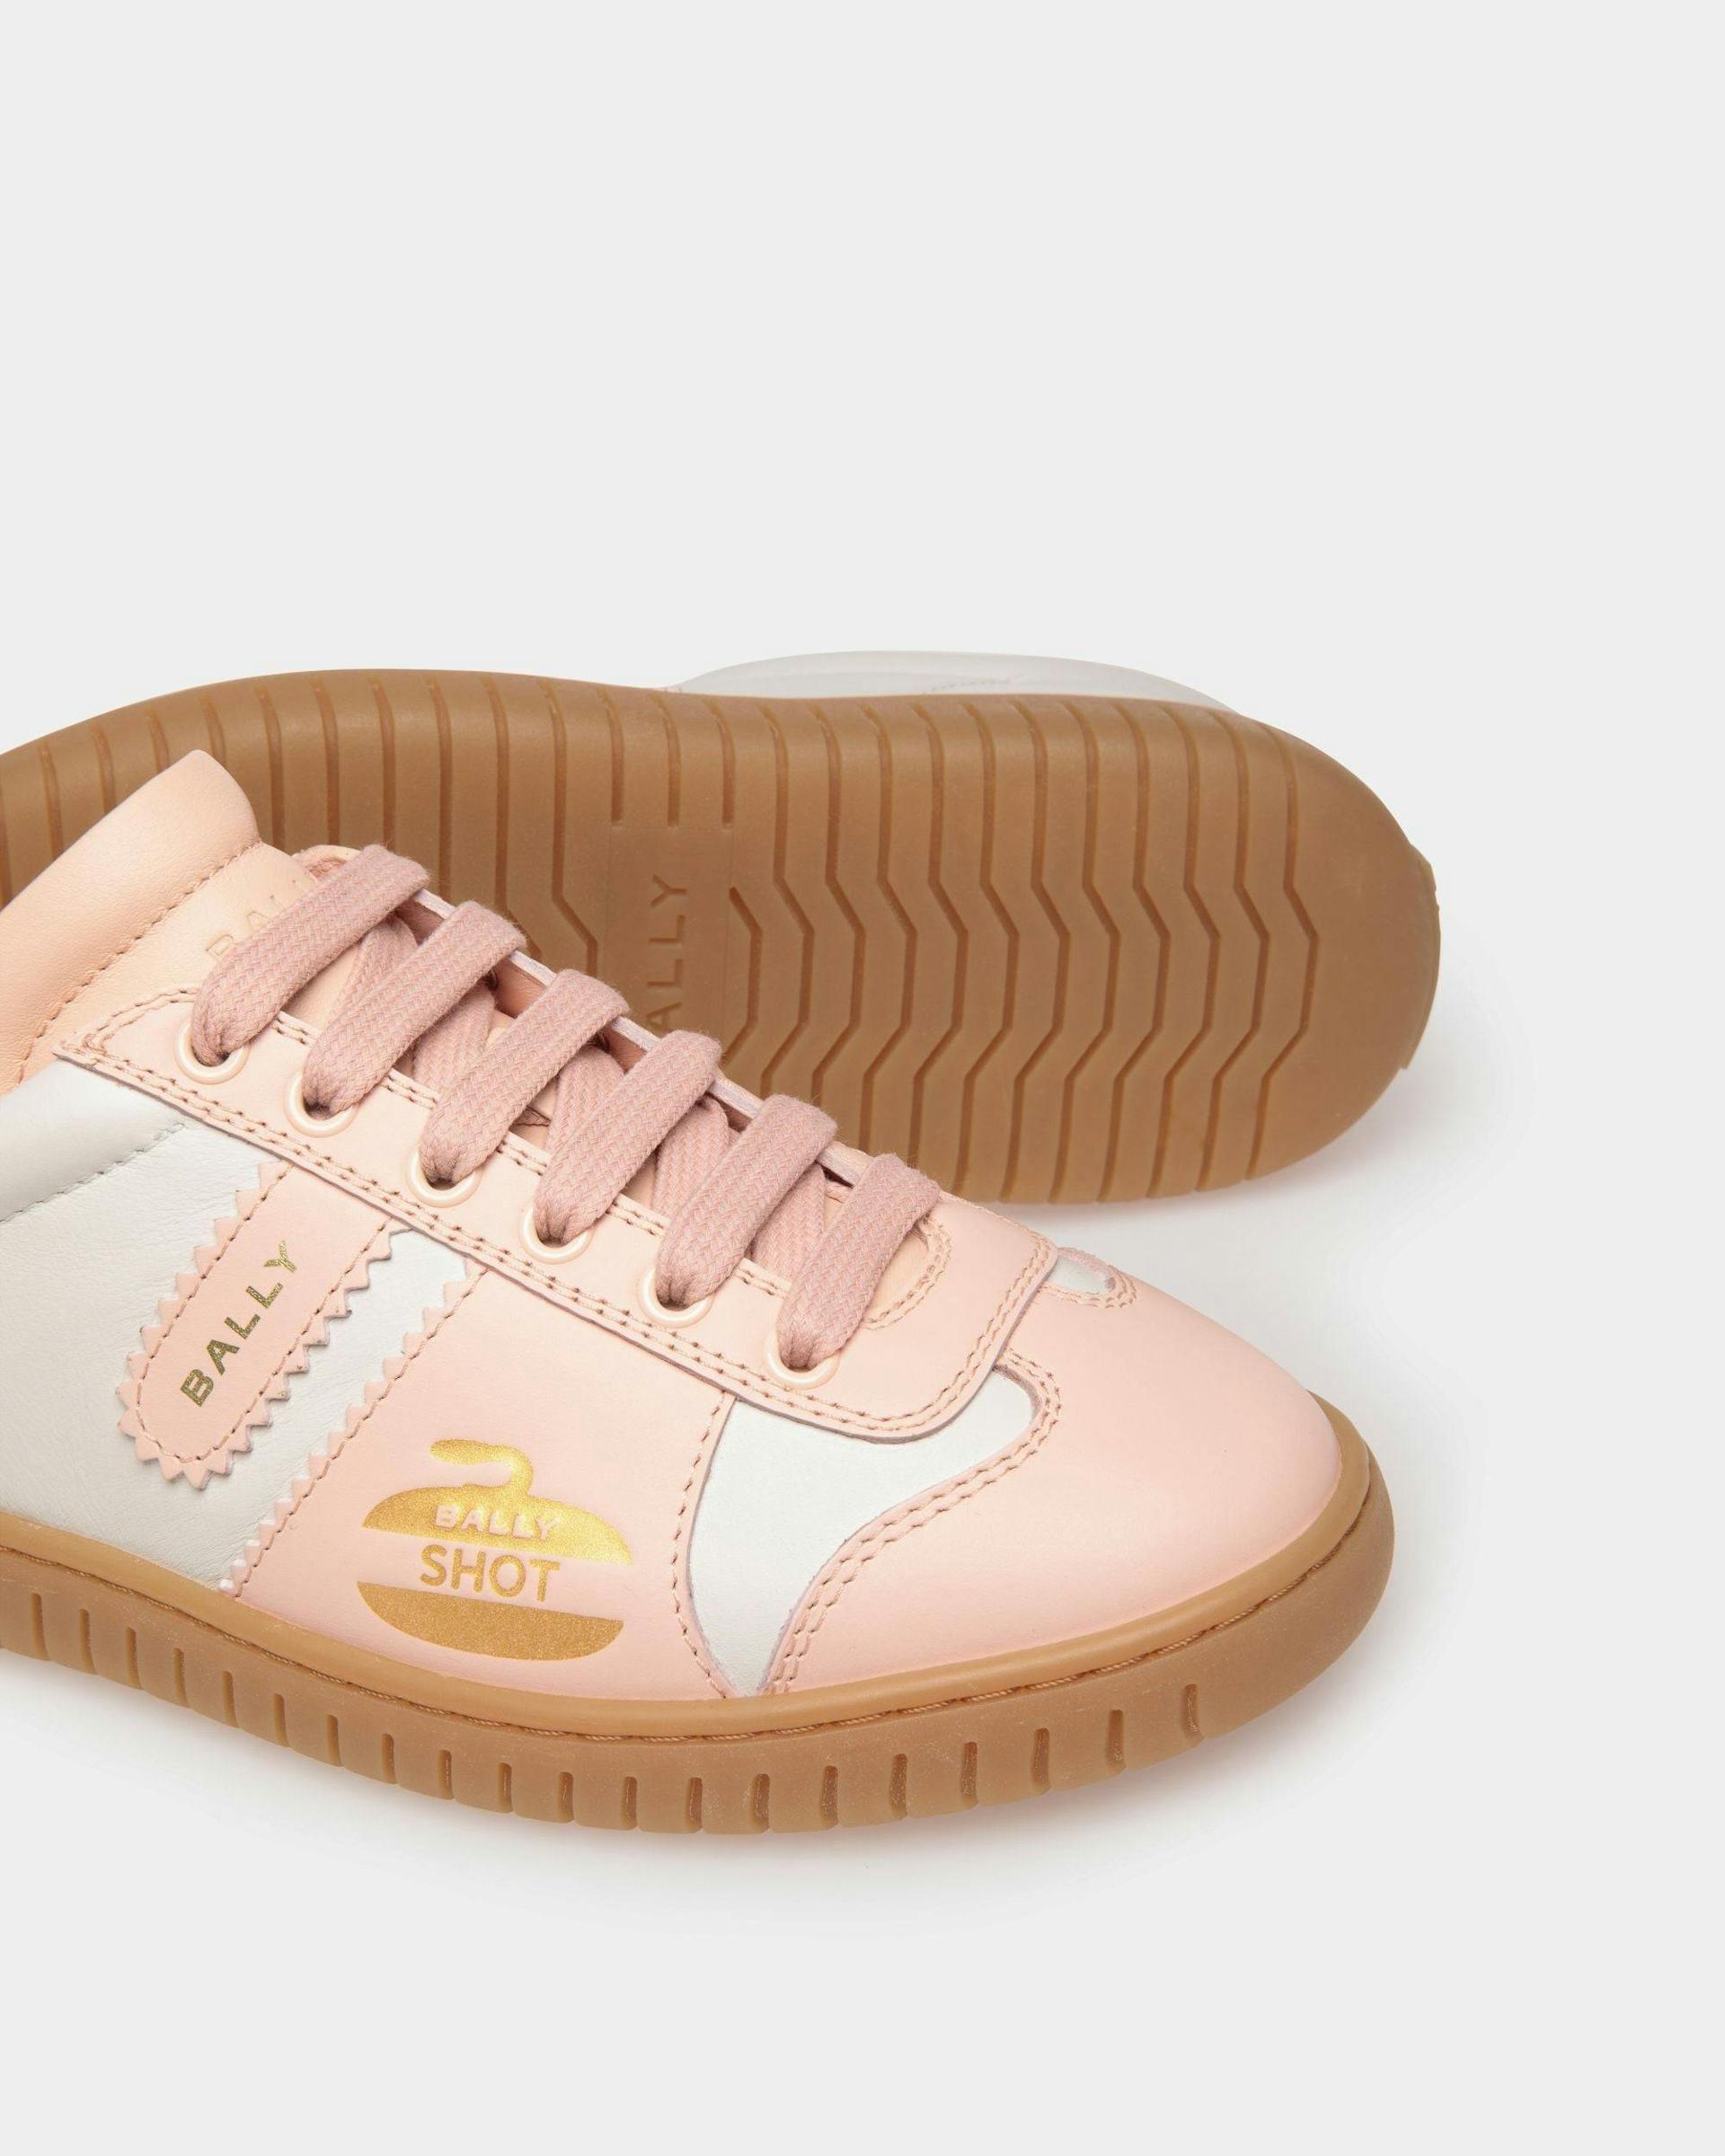 Women's Player Sneaker in White and Baby Pink Leather | Bally | Still Life Below